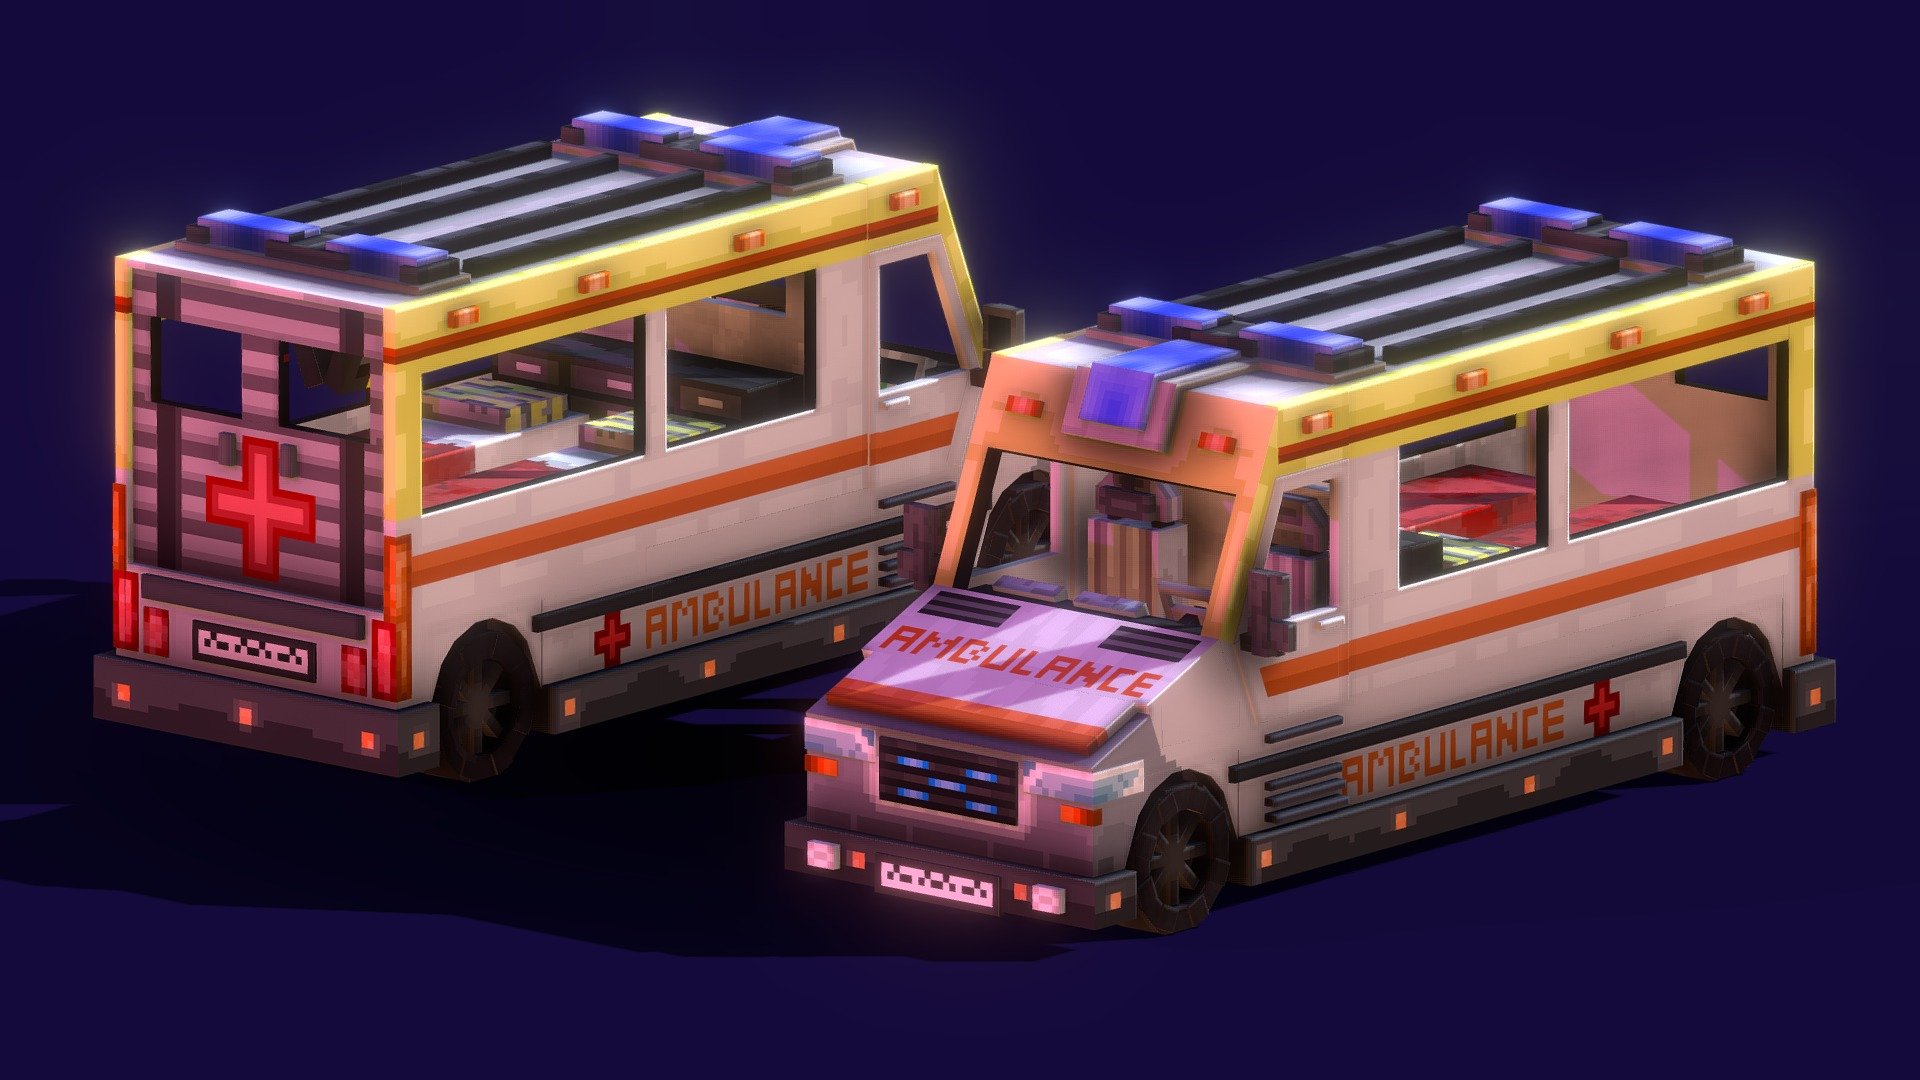 Ambulance van minecraft stylized
low poly

email : abrorcurrents@gmail.com

discord : abror08

commisions accepted - Ambulance van - 3D model by Artbor 3d model